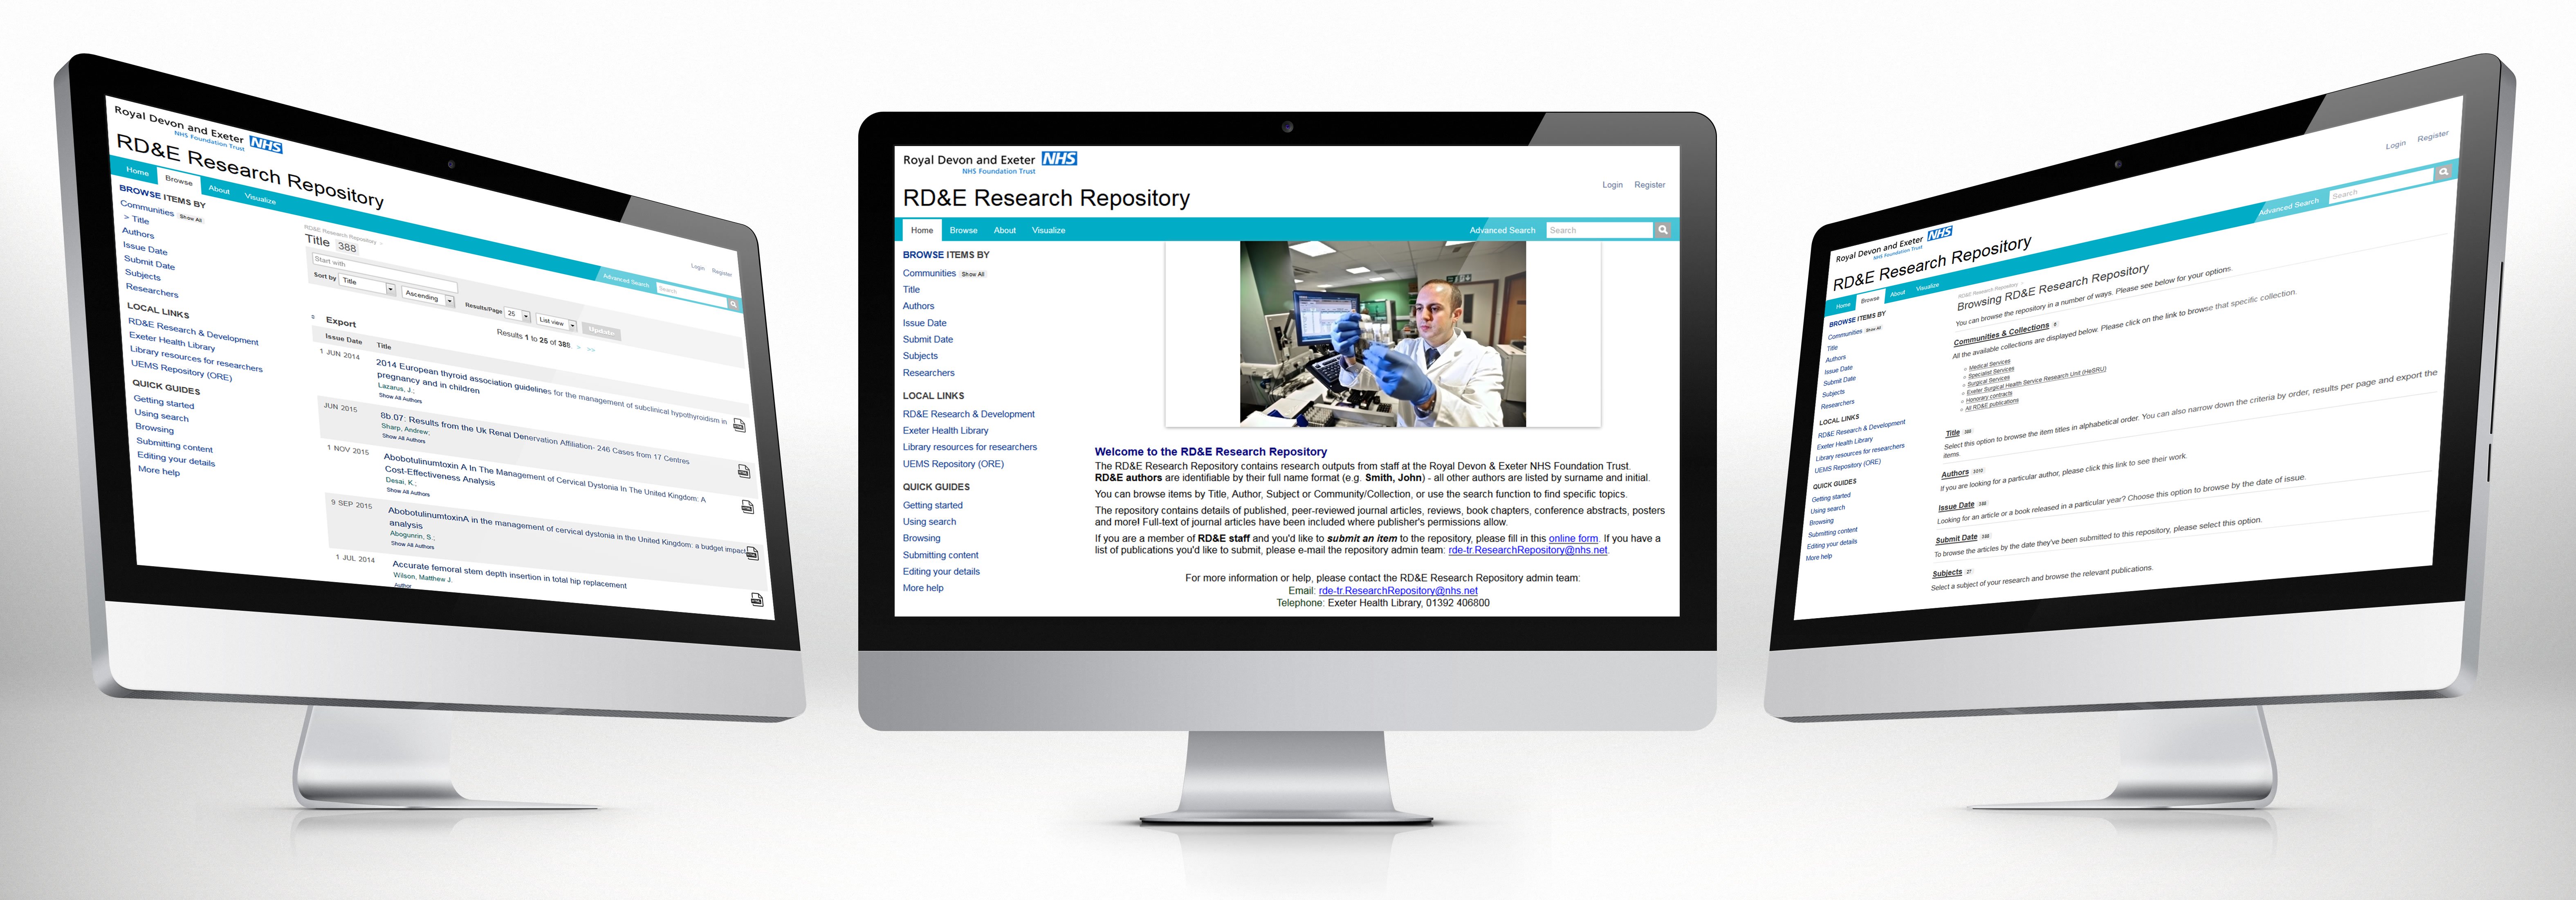 repository research journal